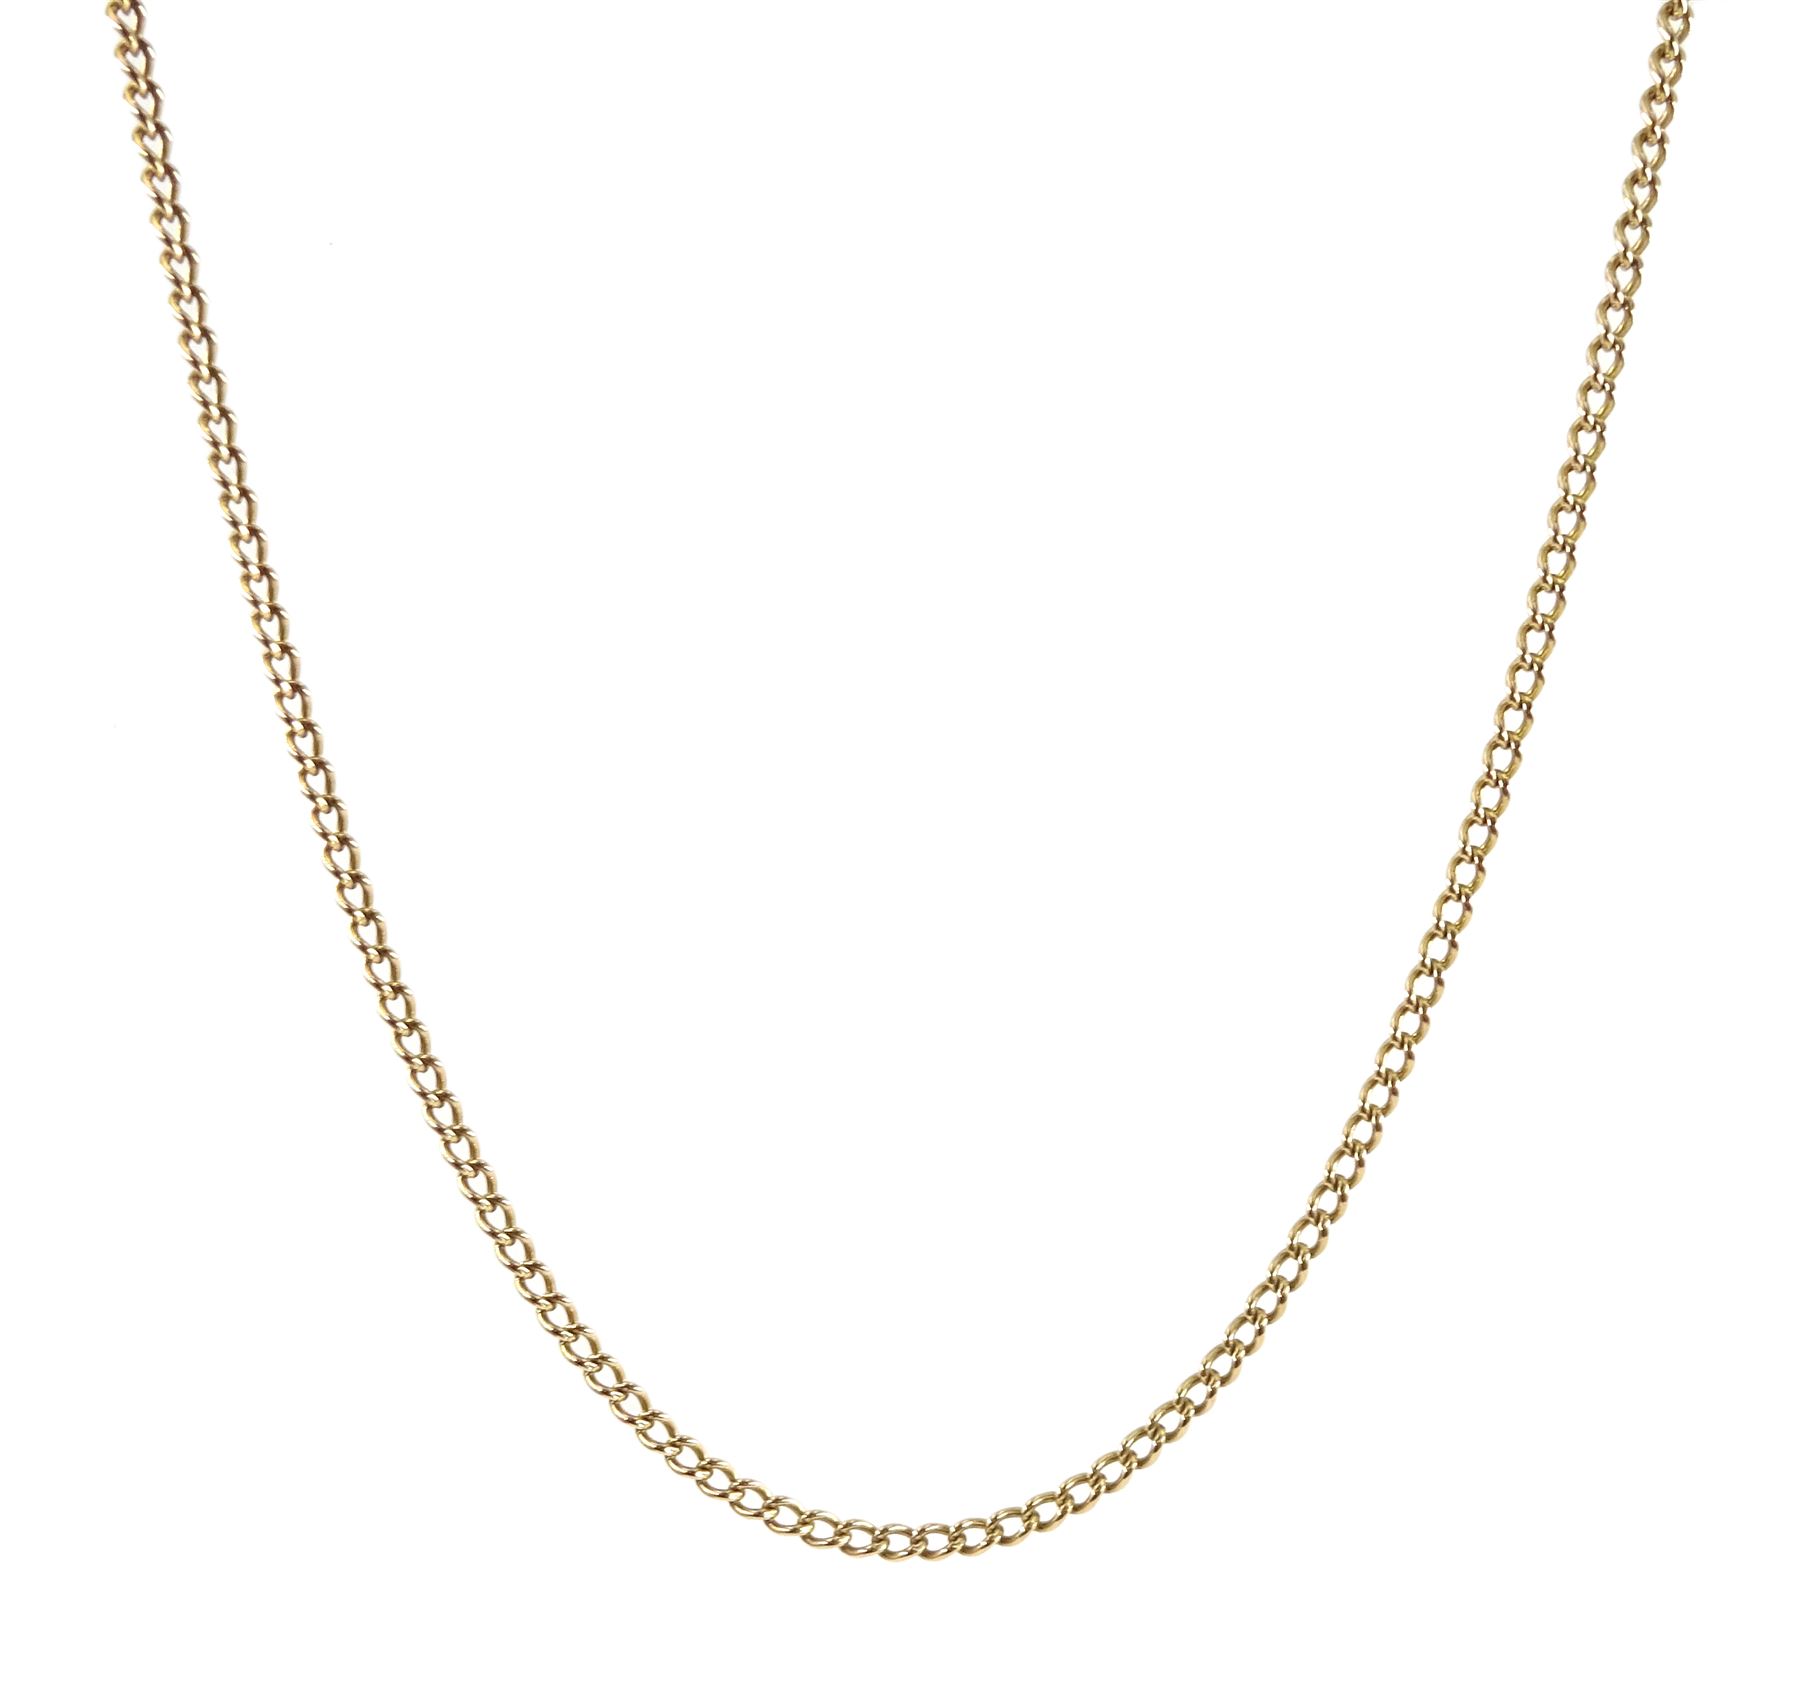 9ct curb link chain necklace hallmarked